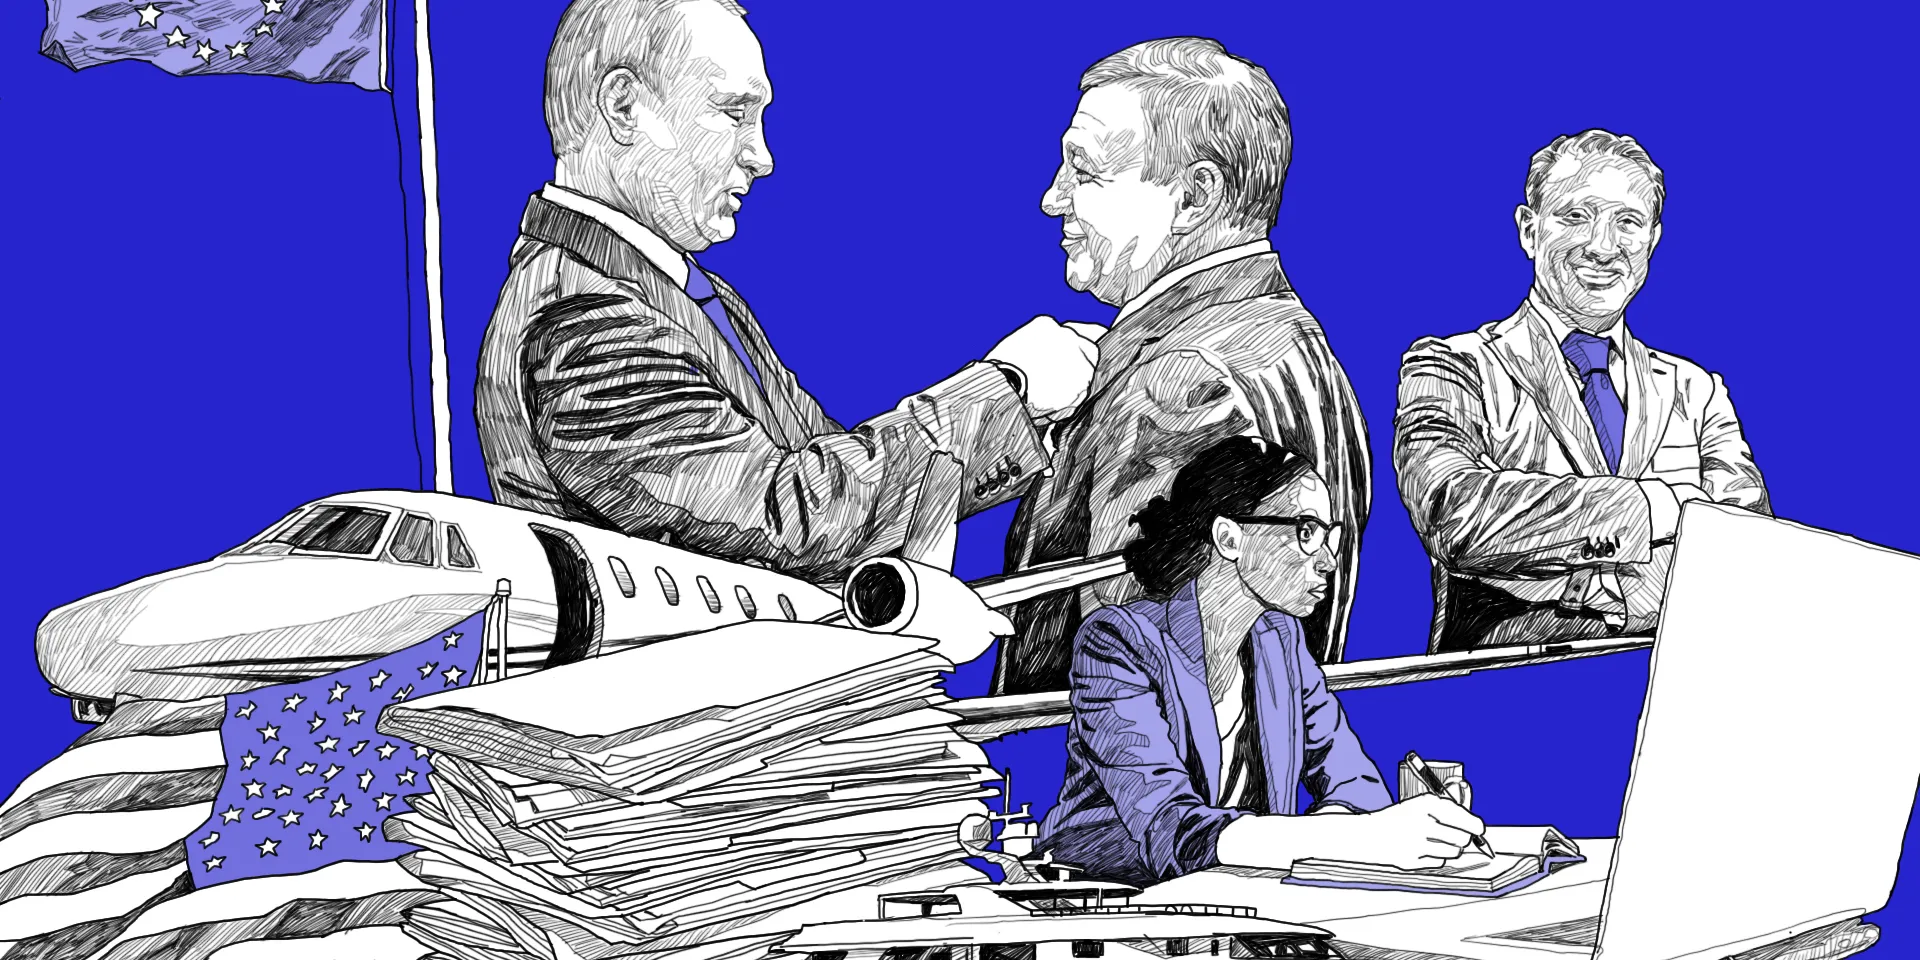 Leaked Emails Reveal How Putin’s Friends Dodged Sanctions With Help of Western Enablers